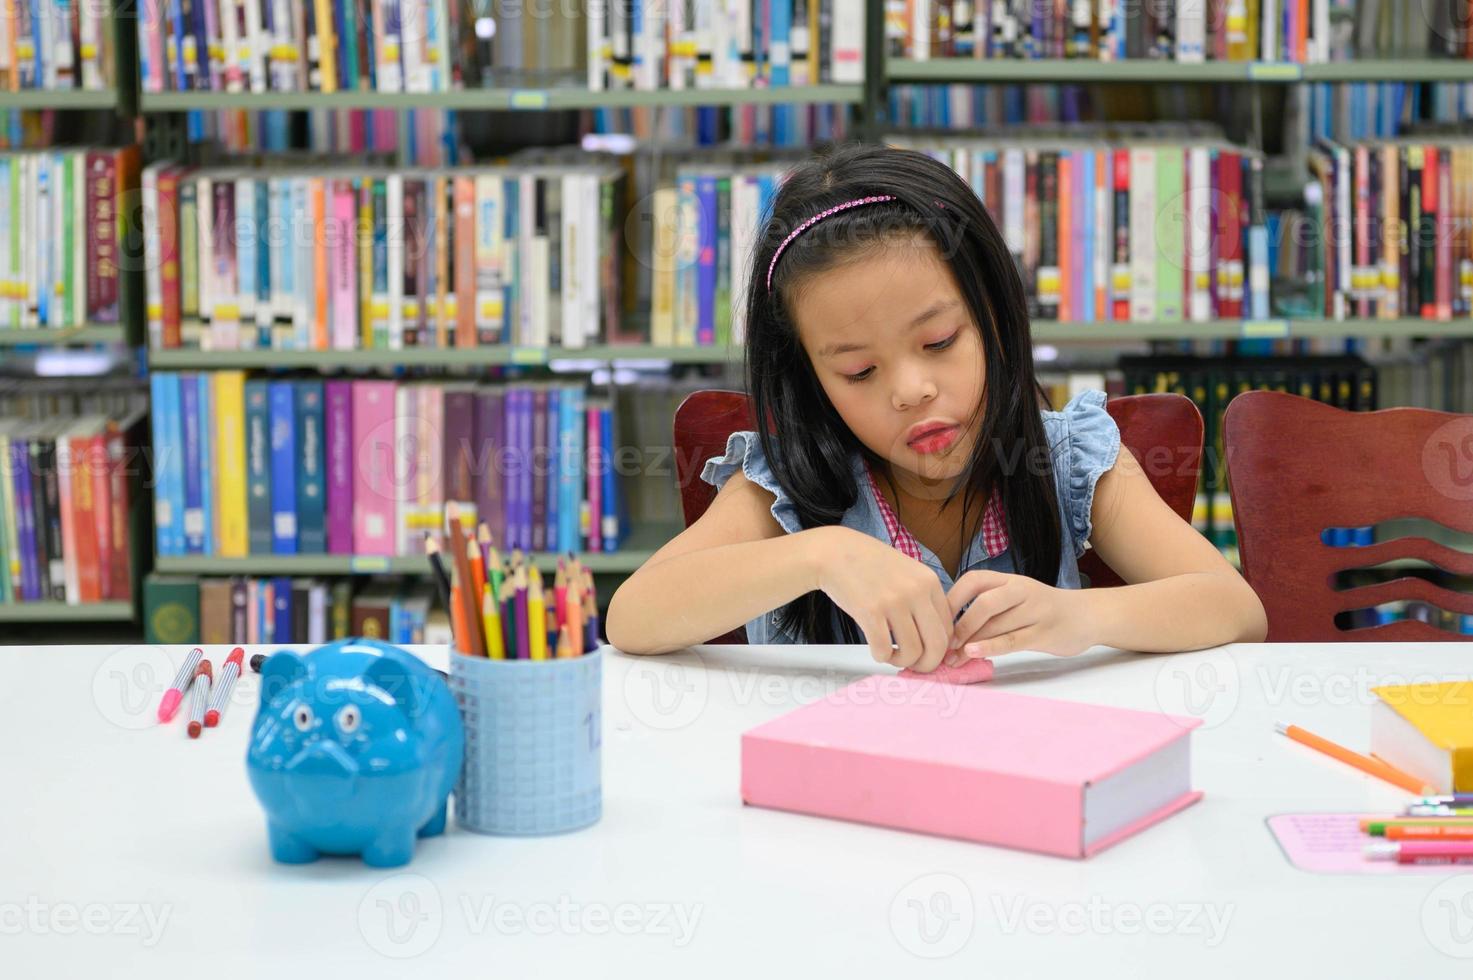 Asian girl folding and crafting paper in library during art class. Education and activity concept photo